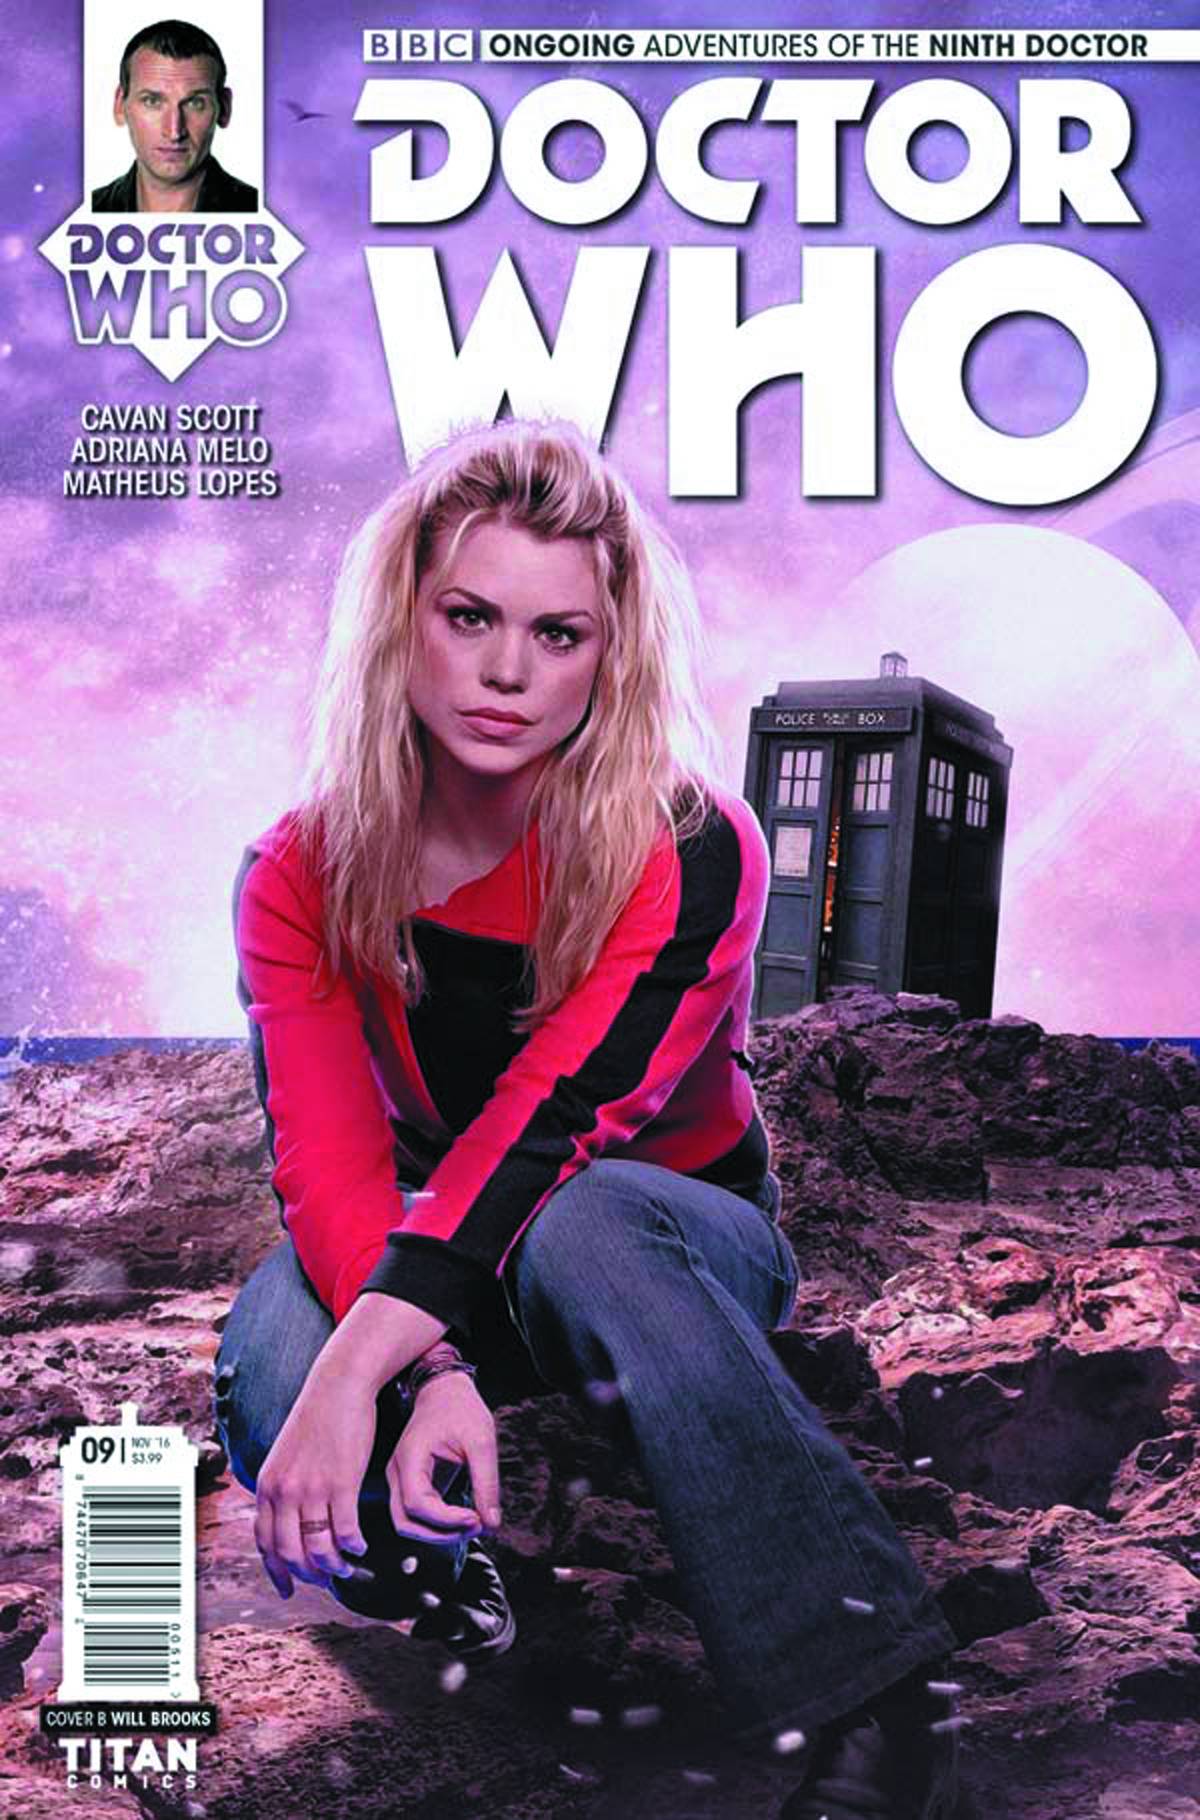 Doctor Who 9th #9 Cover B Photo